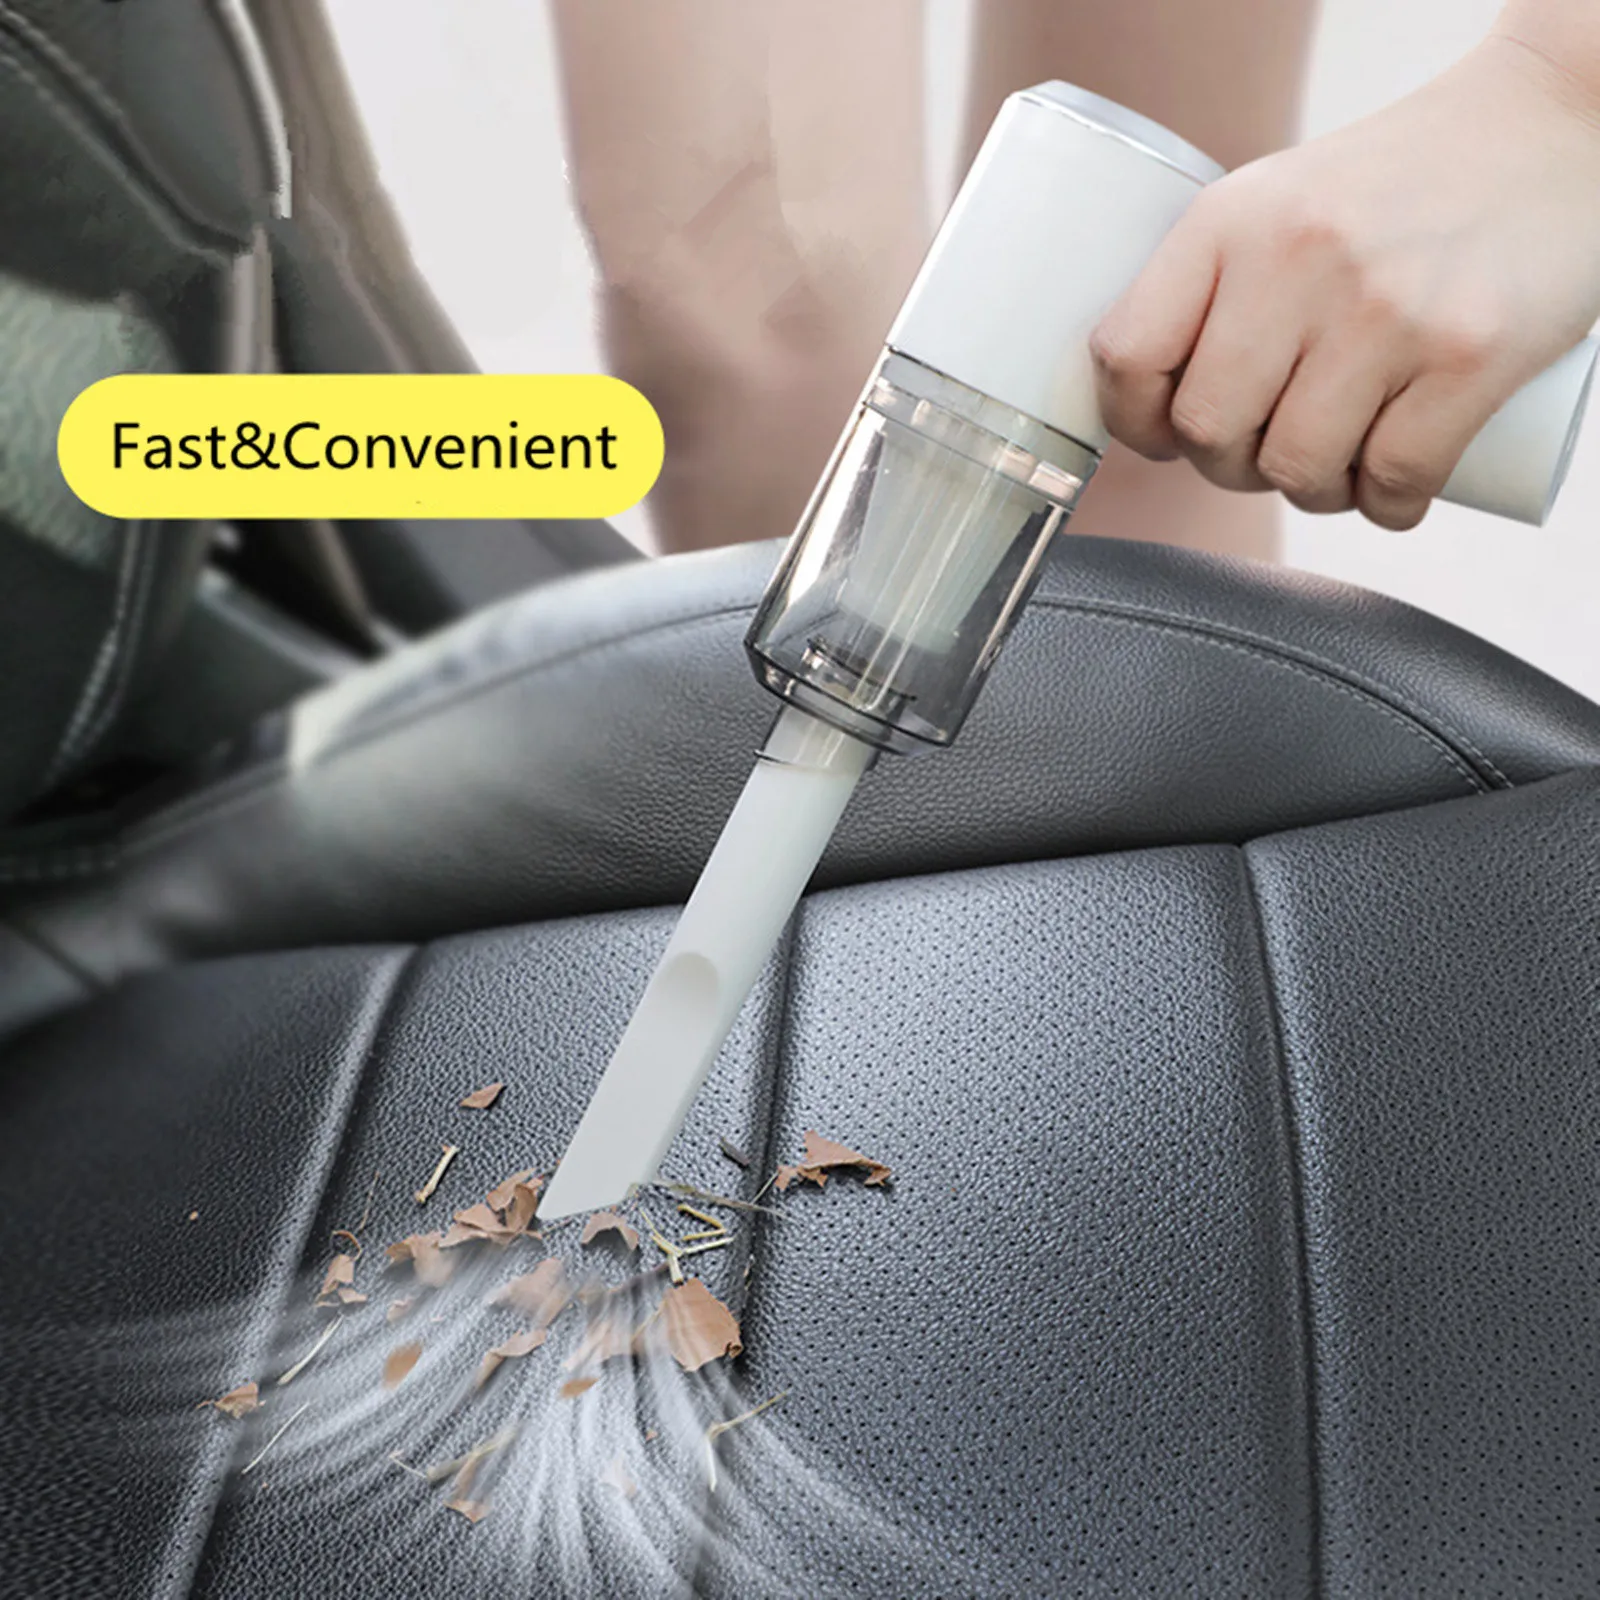 Wireless Handheld Vacuum Cleaner For Car Home Cleaning Portable Household Compact & Large Suction Vacuum Cleaner Home Cleaning magic mop